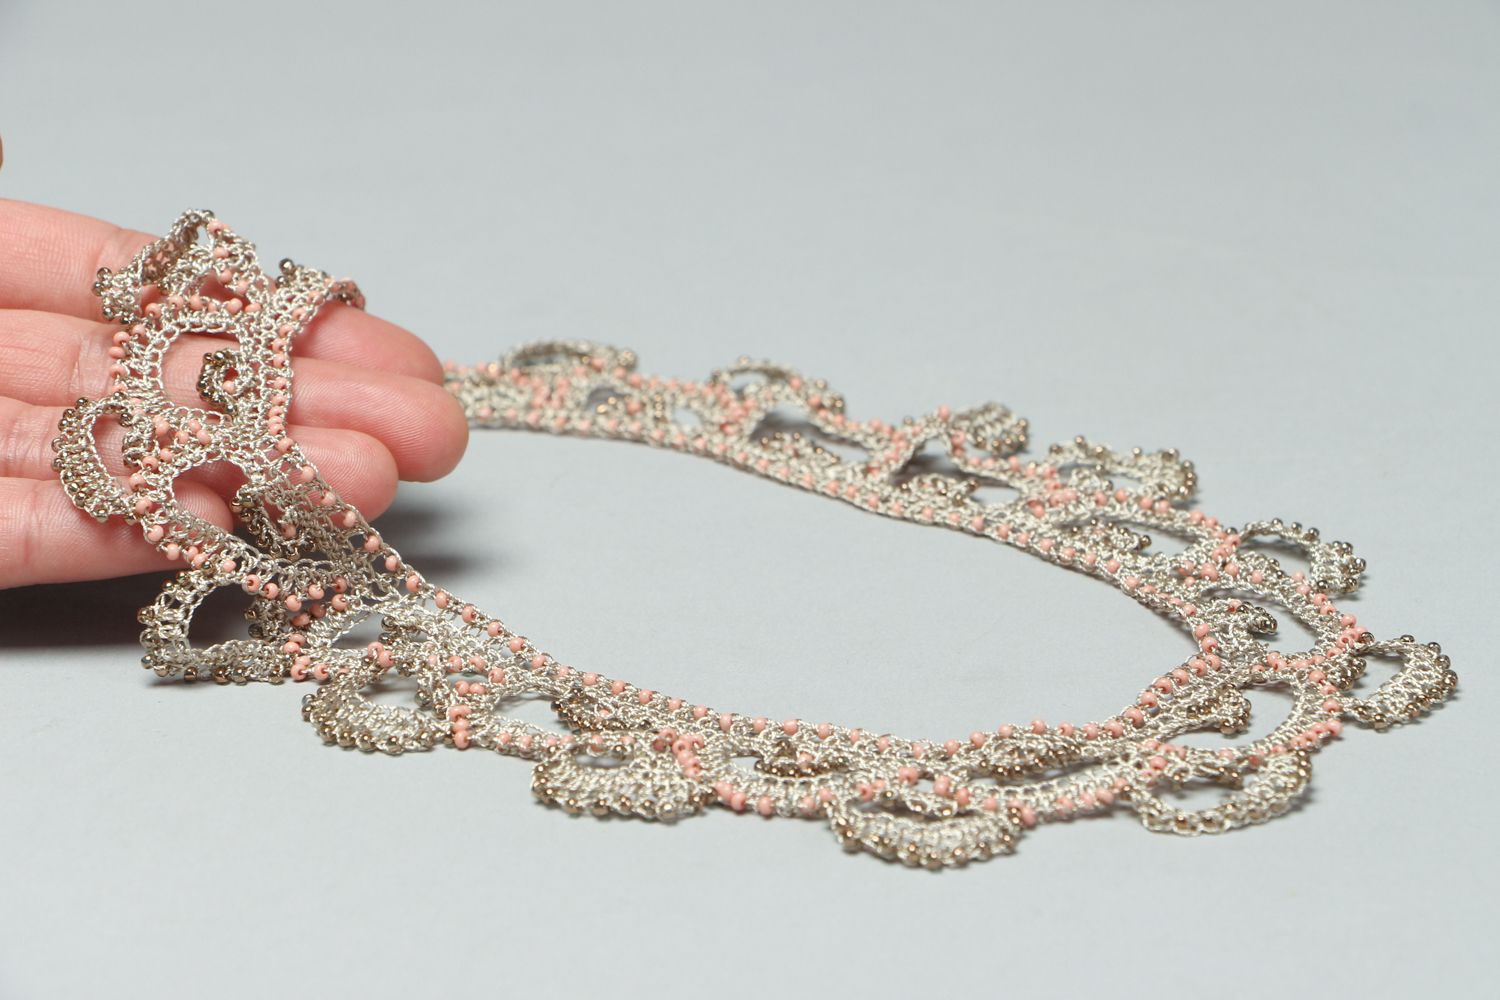 Lacy crochet necklace with beads photo 4